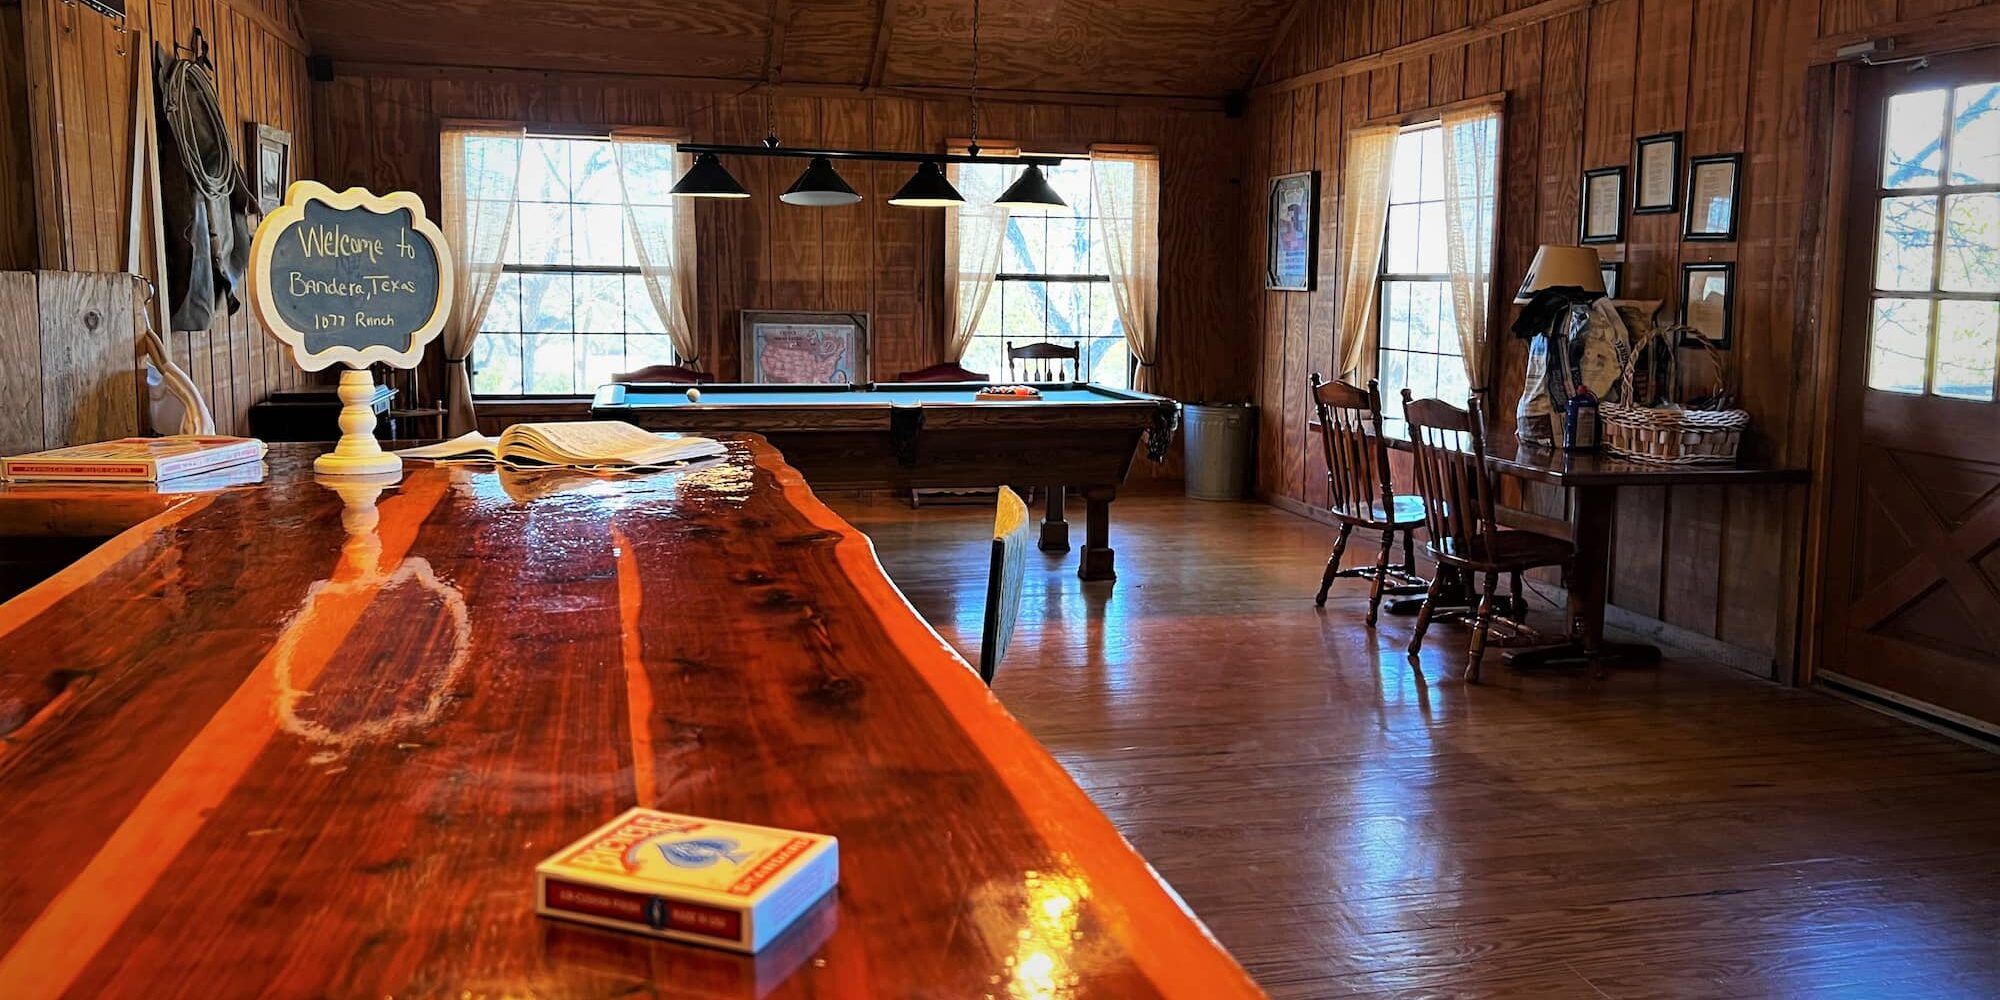 A pool table is viewed from across the room in the lodge lounge, a deck of cards sits on the bar in foreground.